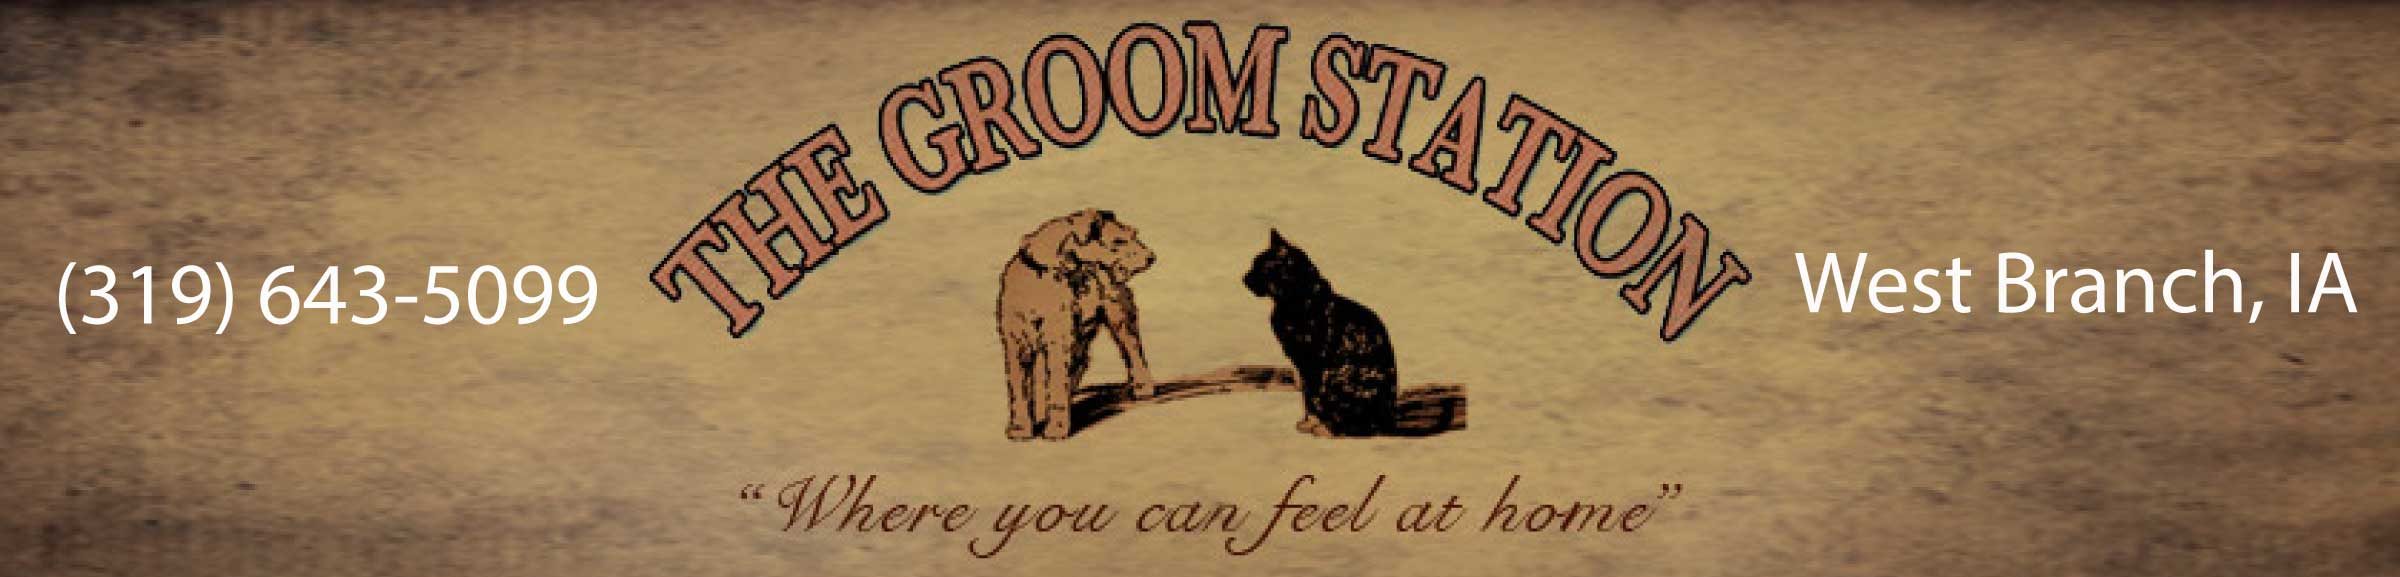 The groom station - full service pet grooming - West Branch, Iowa